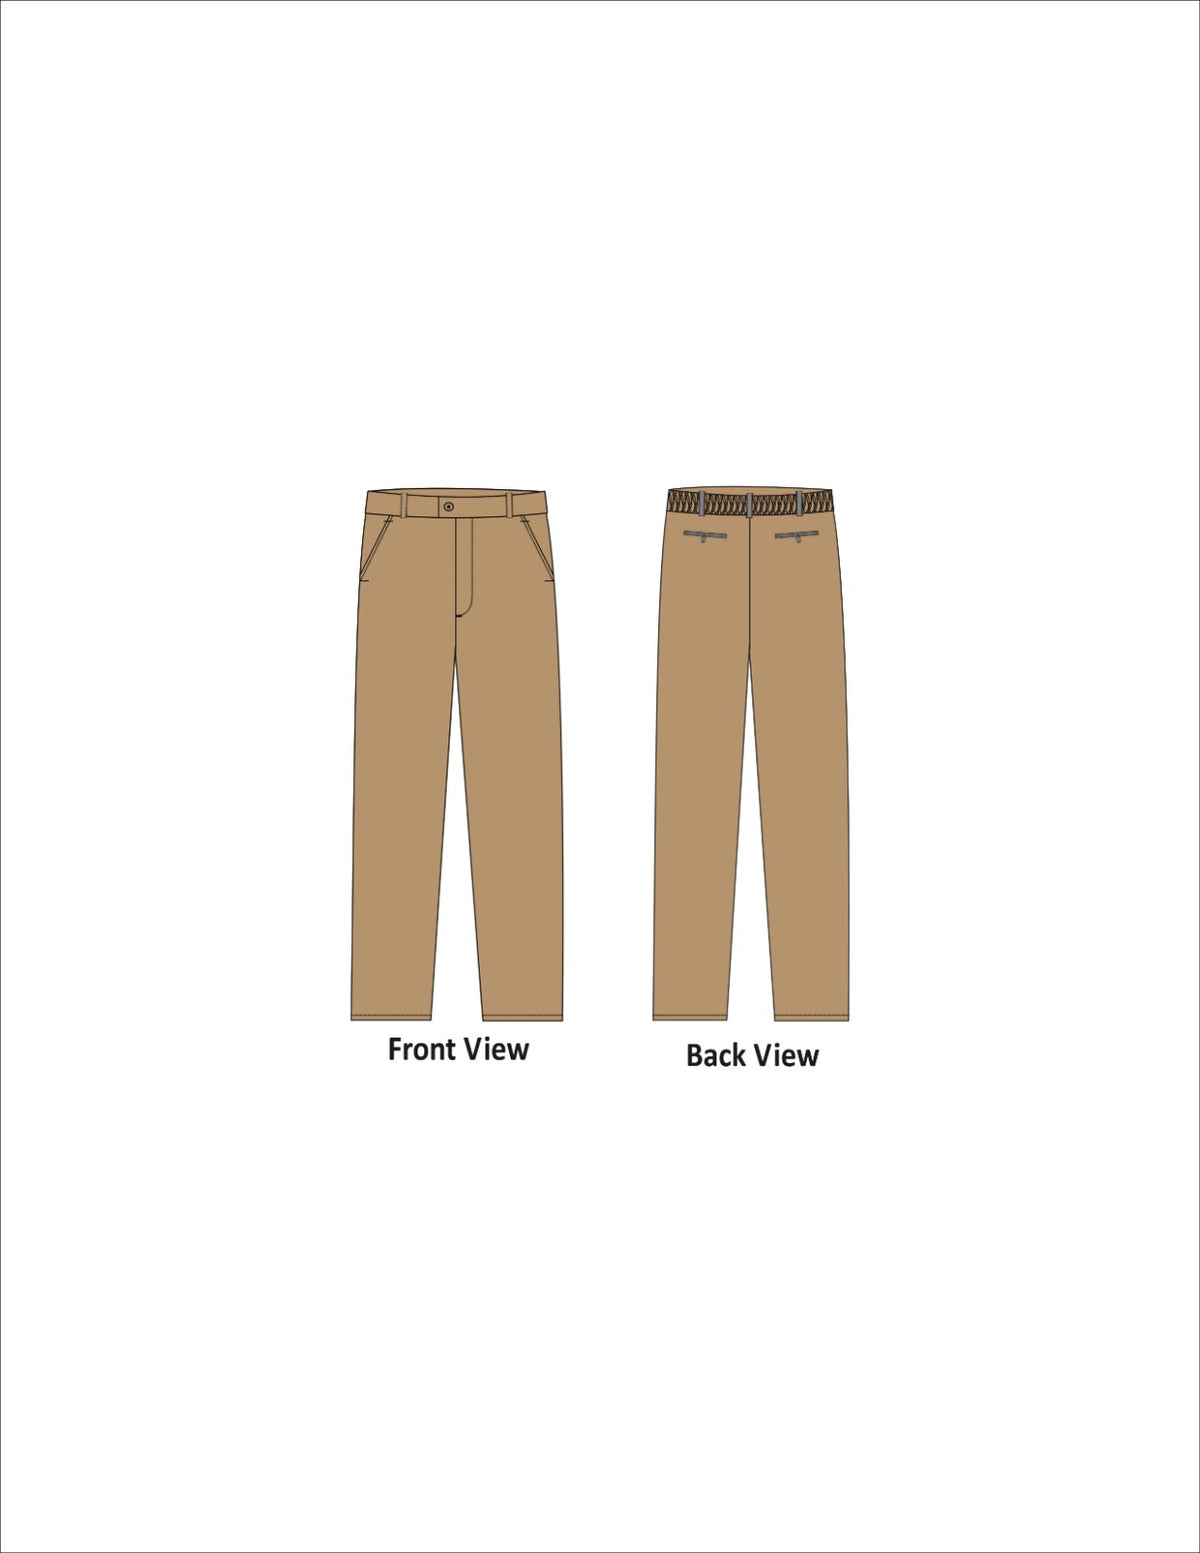 PANT KHAKI FOR BOYS ROOTS IVY ( LENGHT )